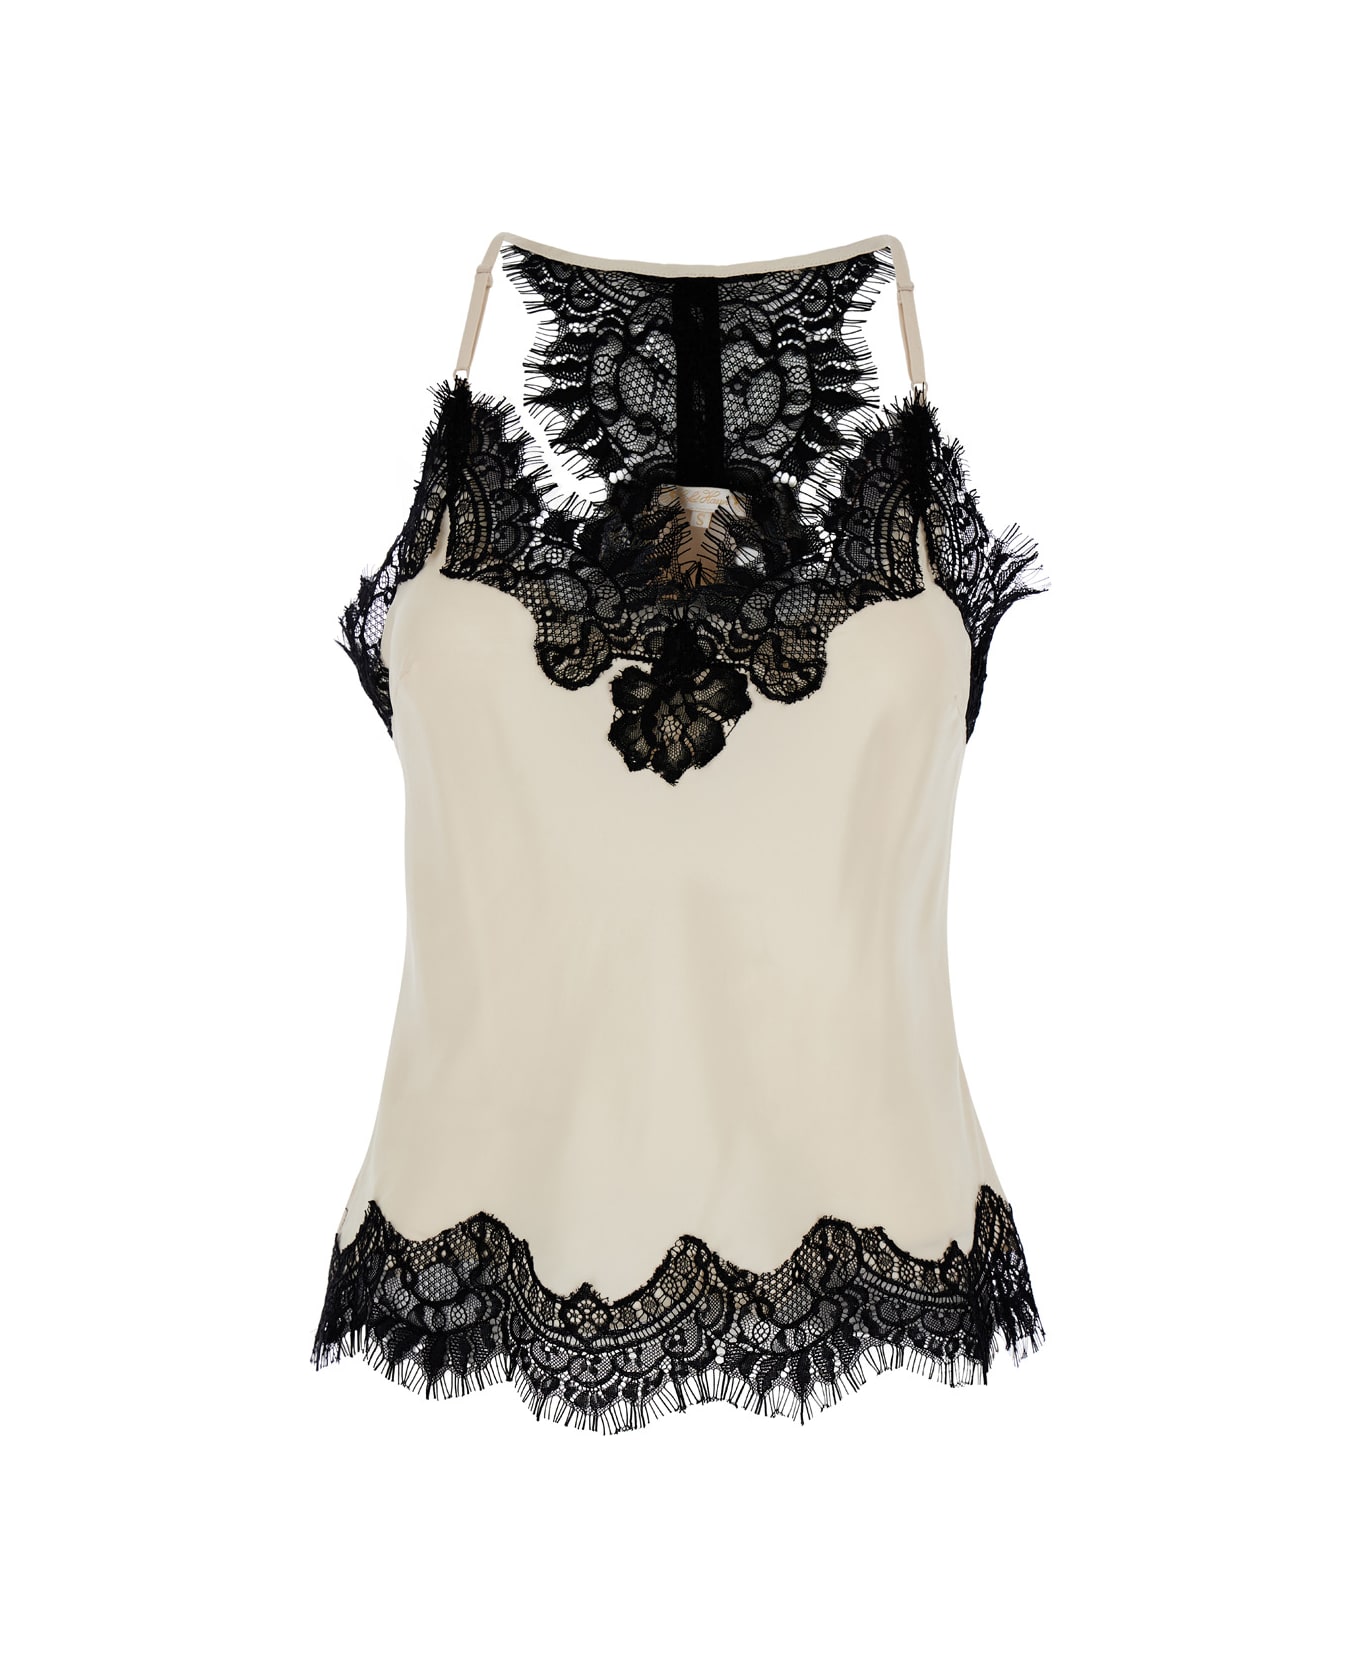 Gold Hawk 'lucy' White Camie Top With Lace Trim And Racerback In Silk Woman - Beige